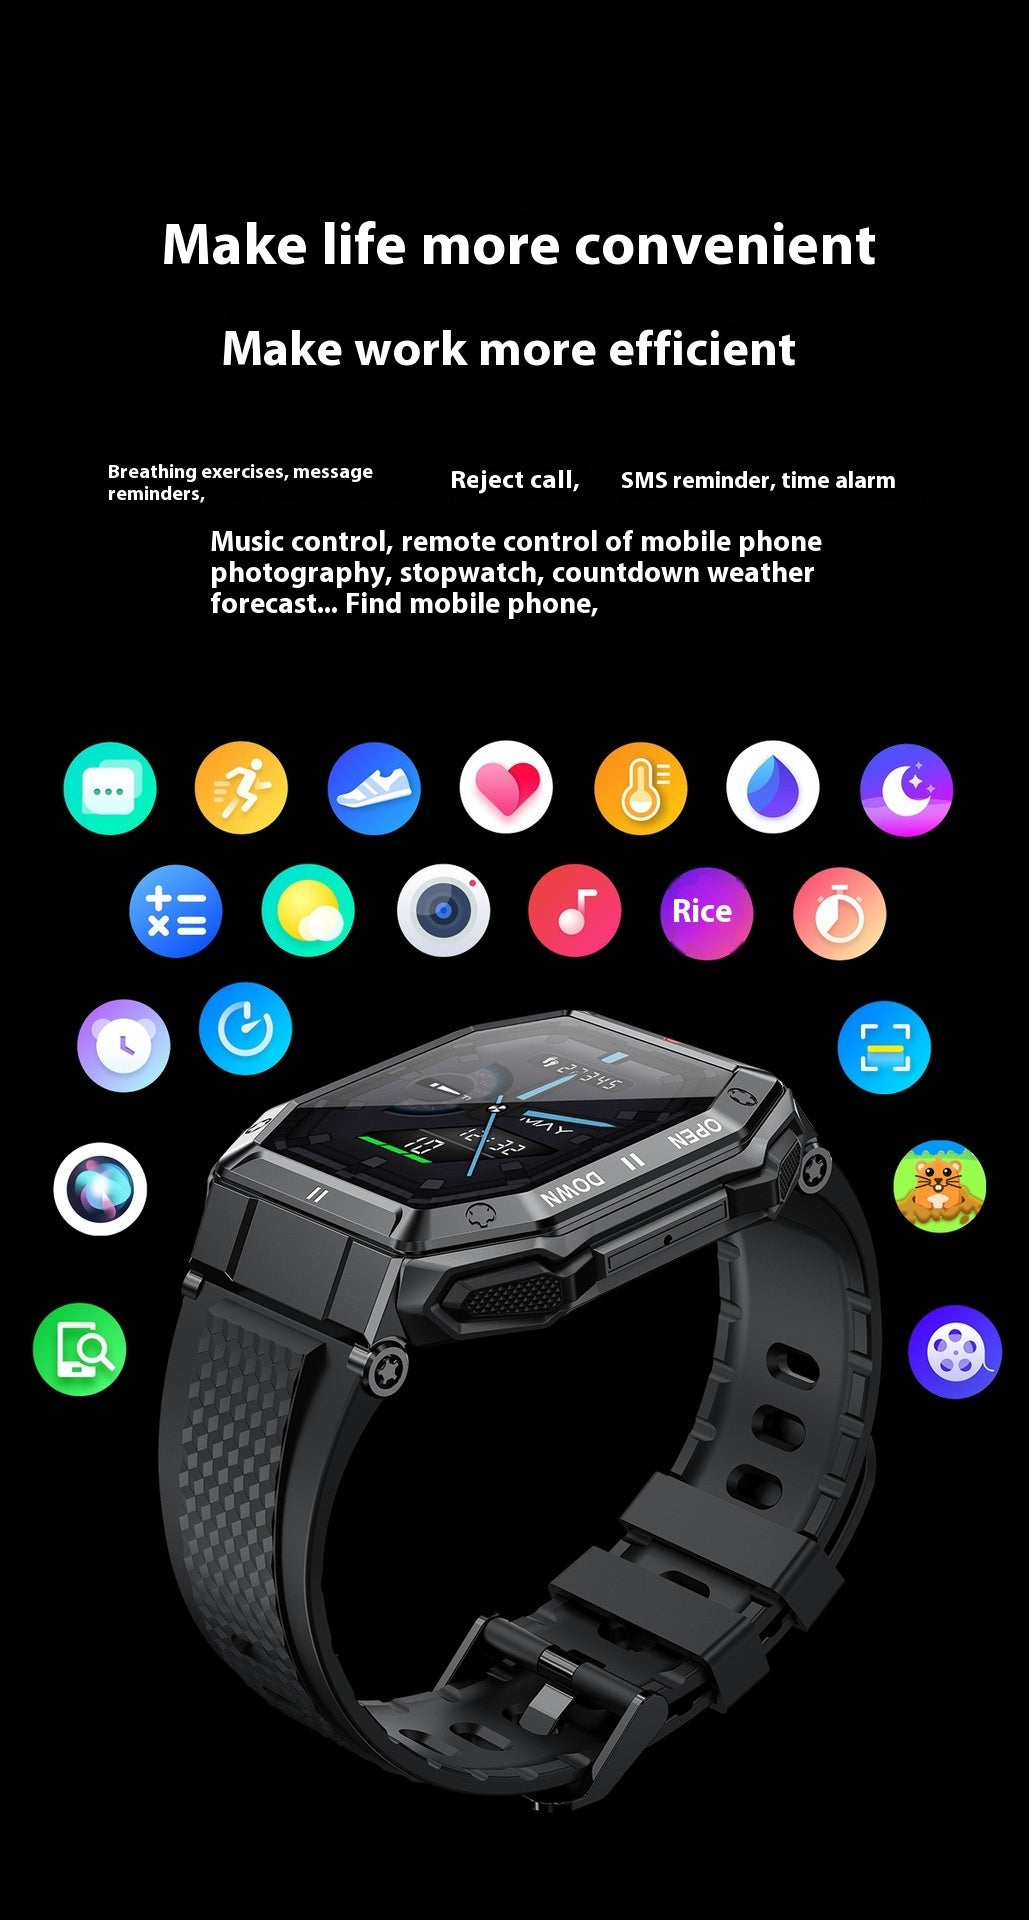 K55 Smart Watch Bluetooth Calling Sports Heart Rate Blood Pressure Monitoring ShoppingLife.site